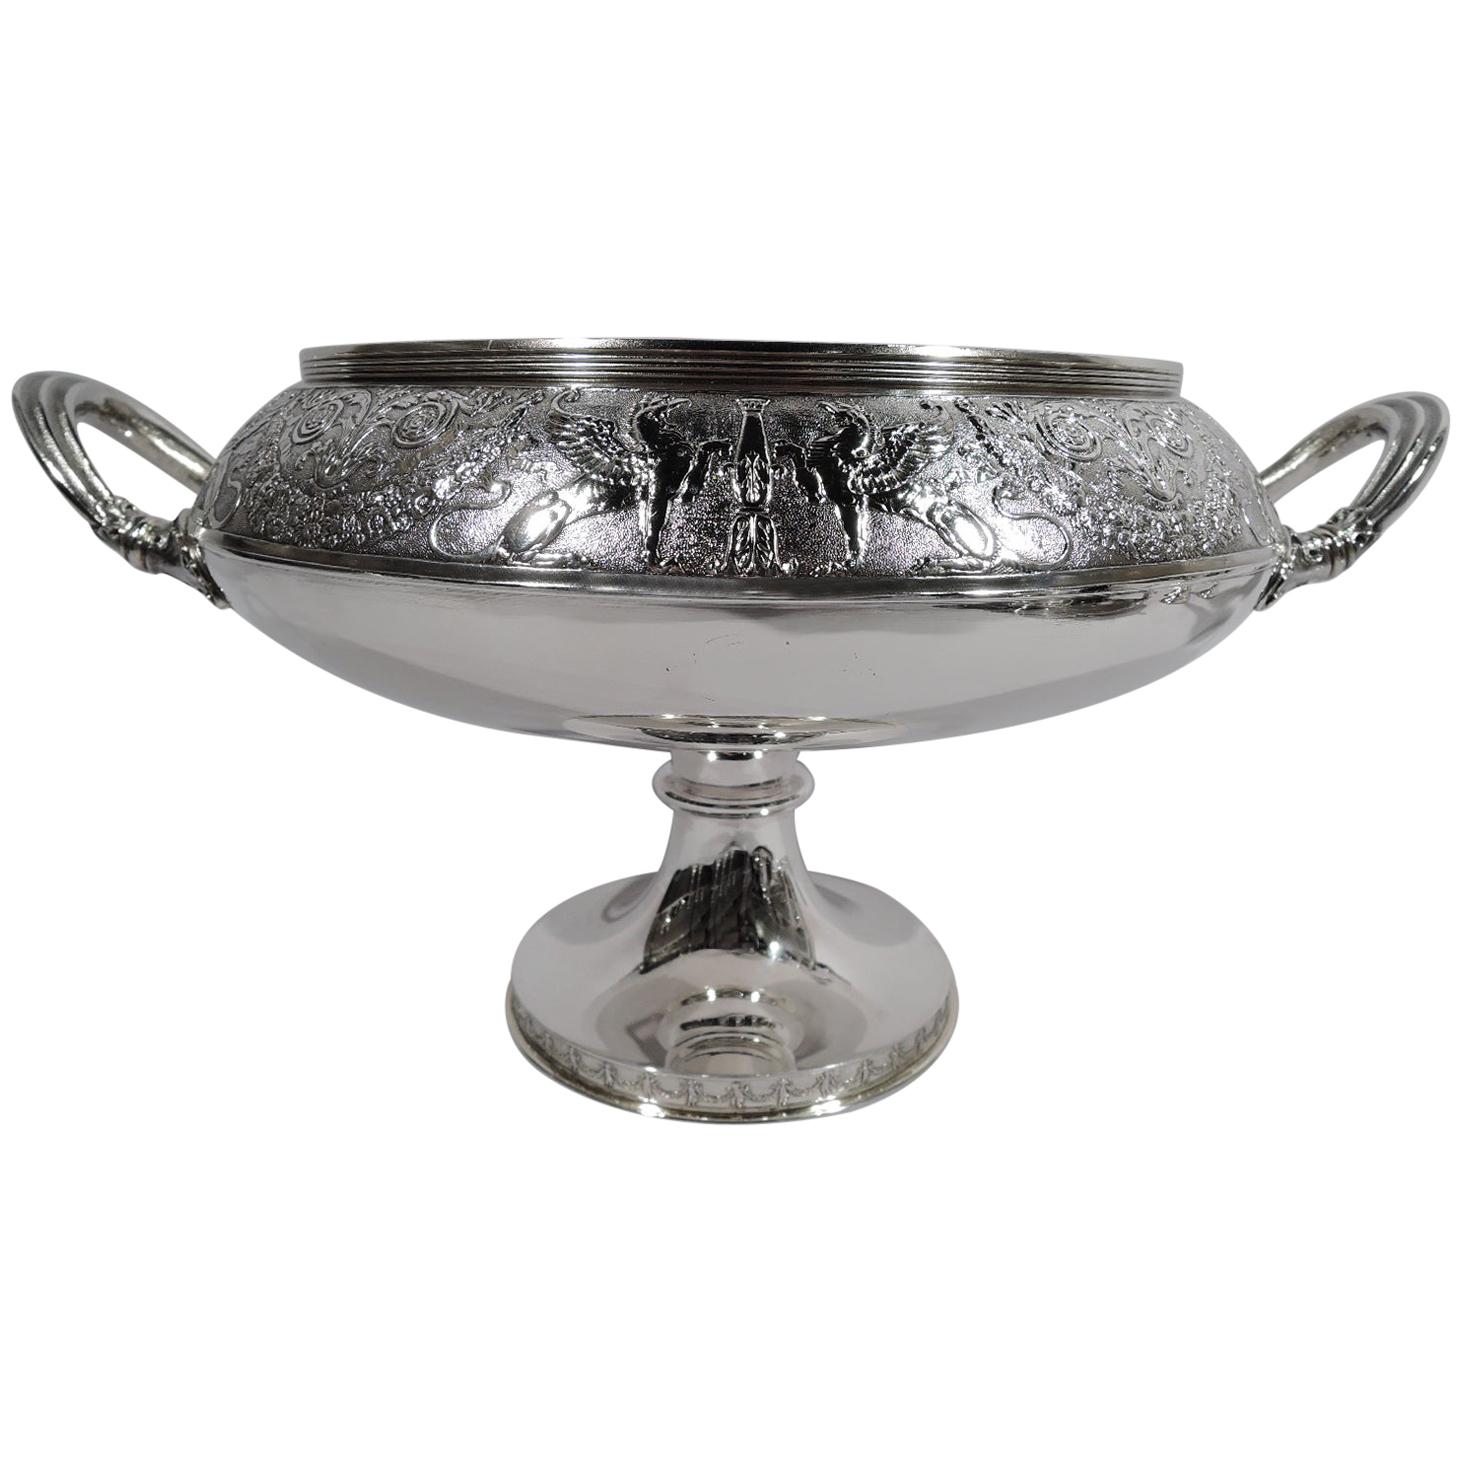 Antique Gorham American Classical Sterling Silver Compote